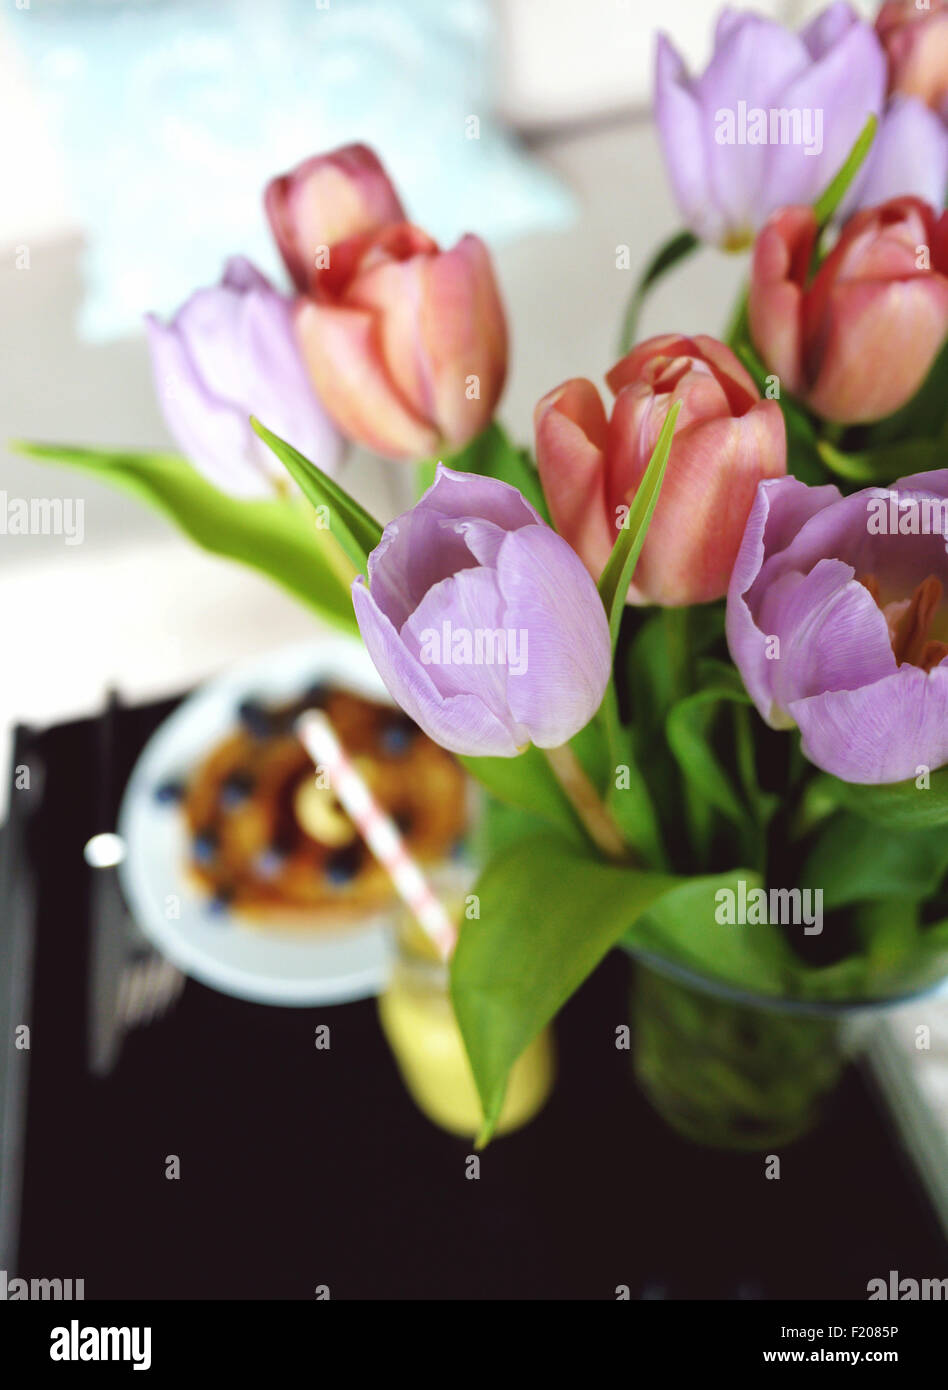 Tulips with breakfast pancakes and a smoothie Stock Photo